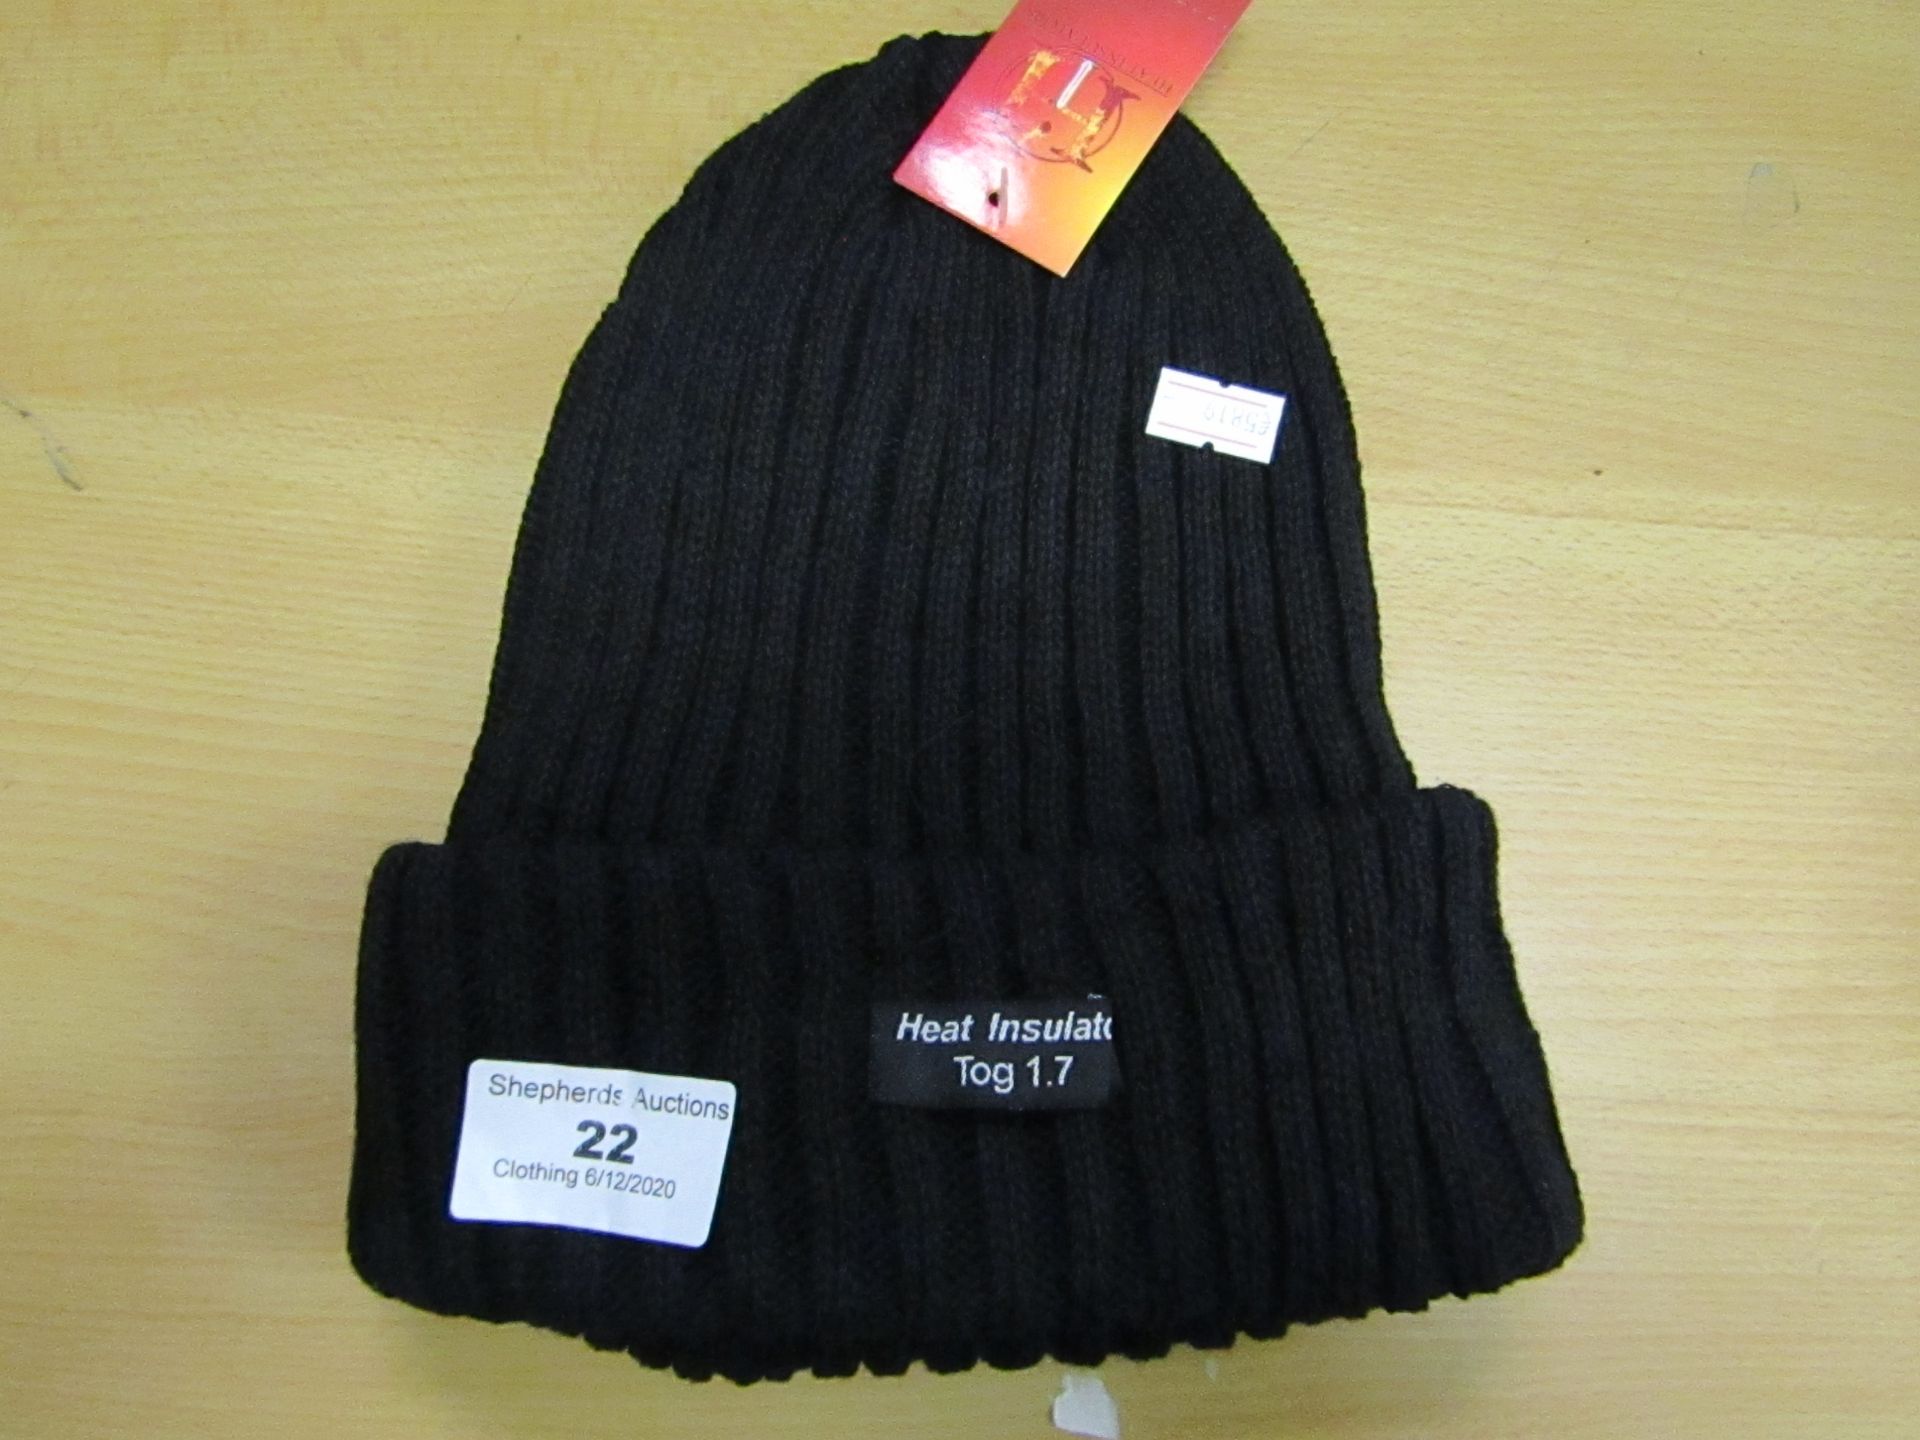 5 X Heat Insulation Boys hats Tog 1.7 all black in colour all new with tags